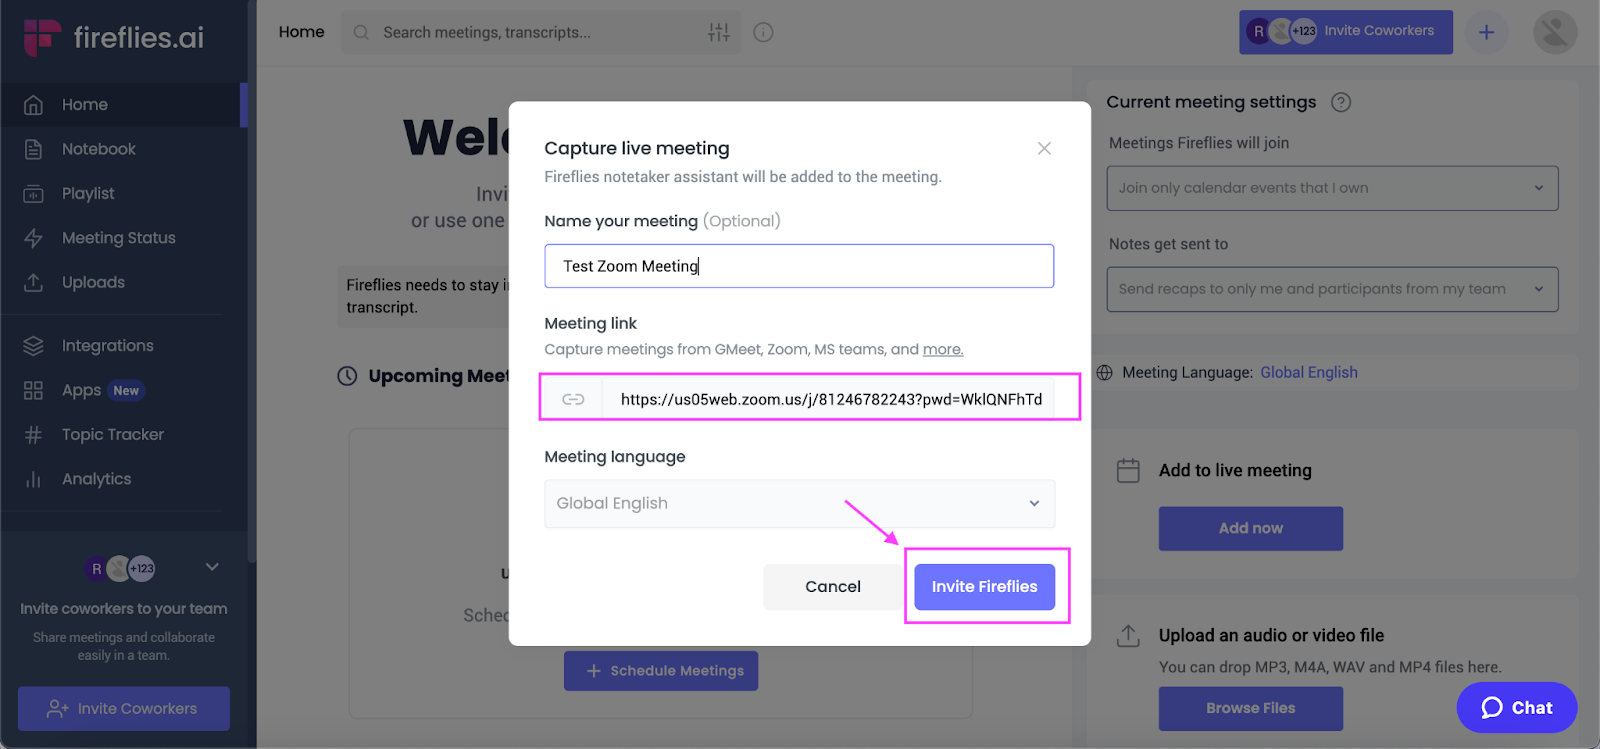 Use Fireflies to transcribe your Zoom meeting - Add Fireflies to live meeting